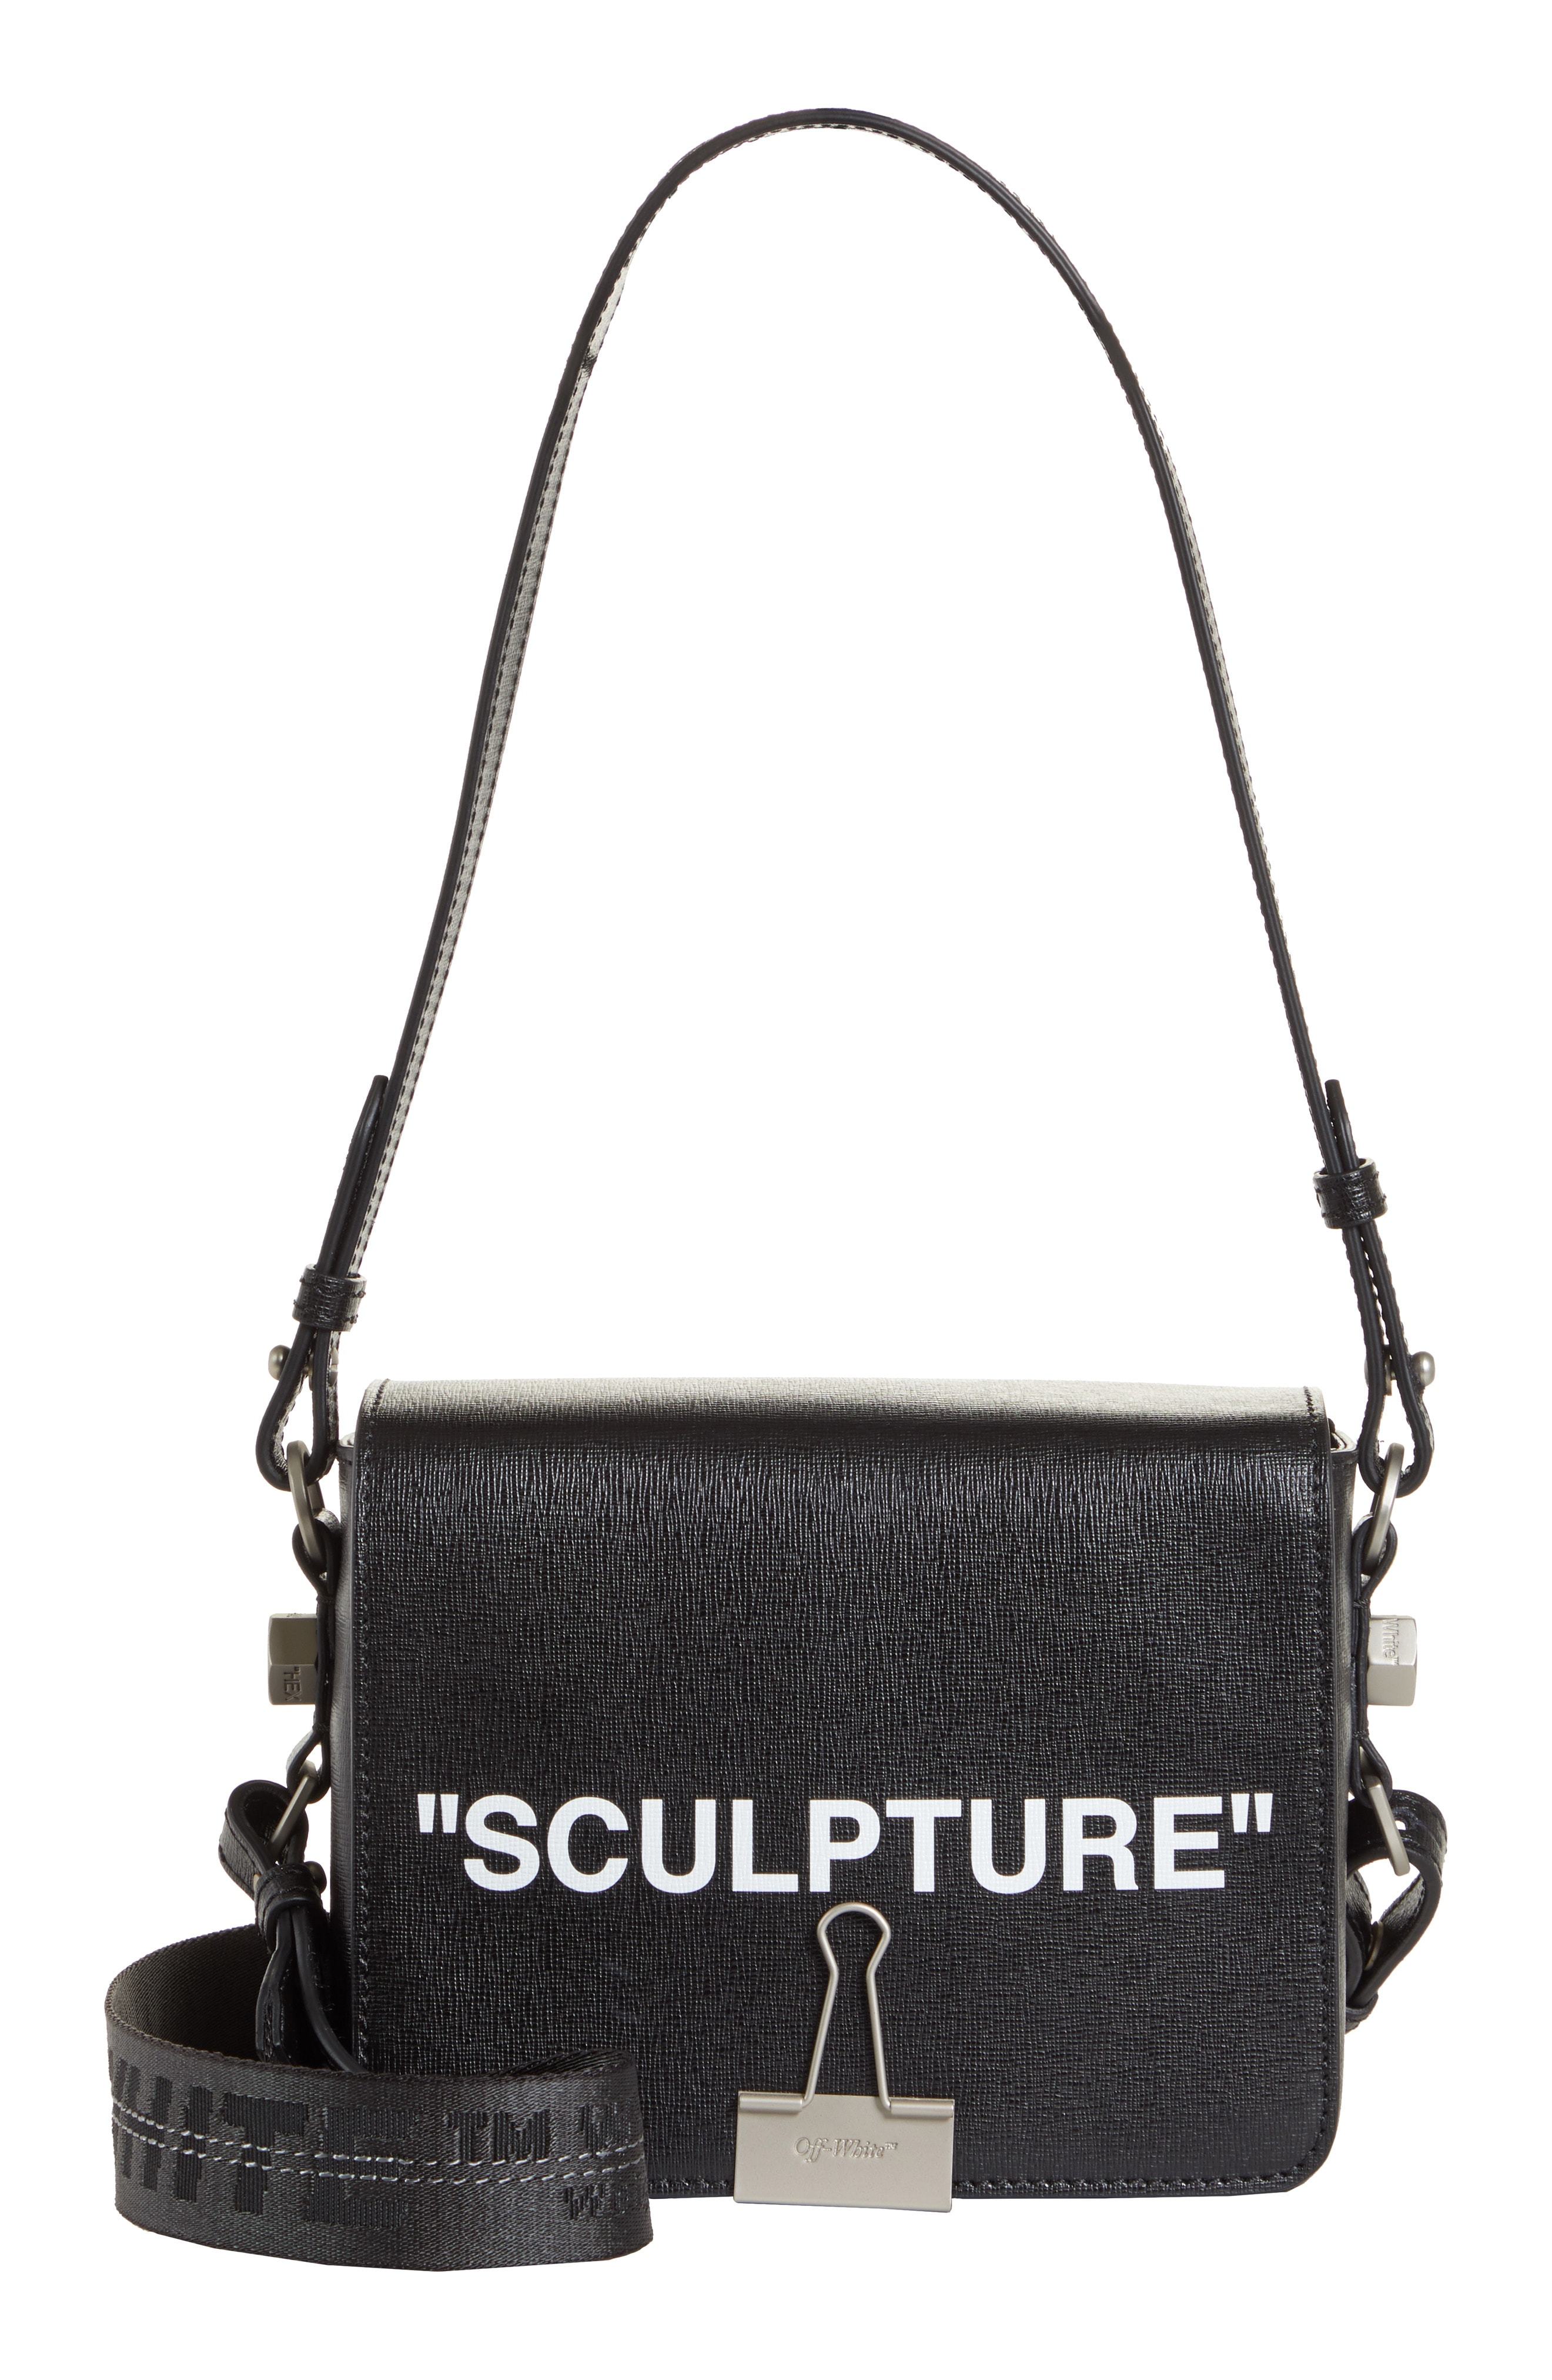 Buy Plastic Handbags: Sculpture to Wear (Schiffer Book for Collectors) Book  Online at Low Prices in India | Plastic Handbags: Sculpture to Wear  (Schiffer Book for Collectors) Reviews & Ratings - Amazon.in